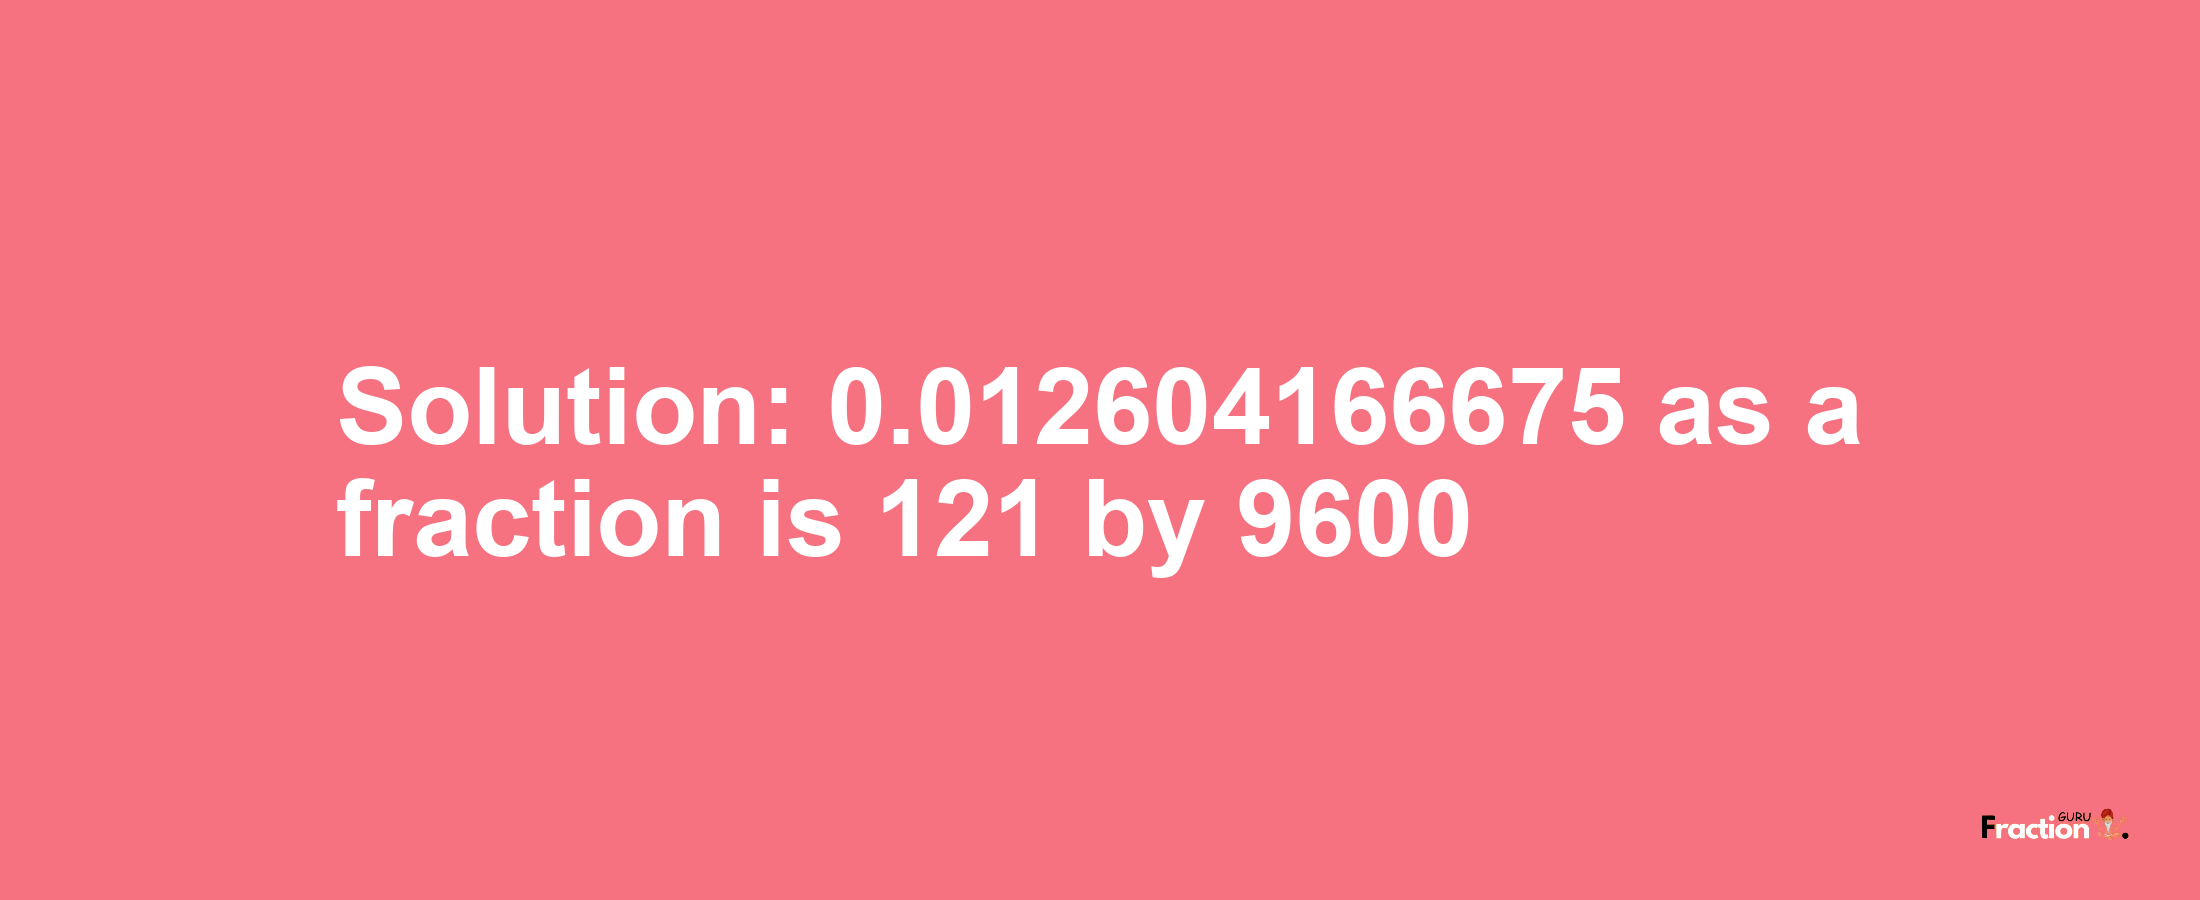 Solution:0.012604166675 as a fraction is 121/9600